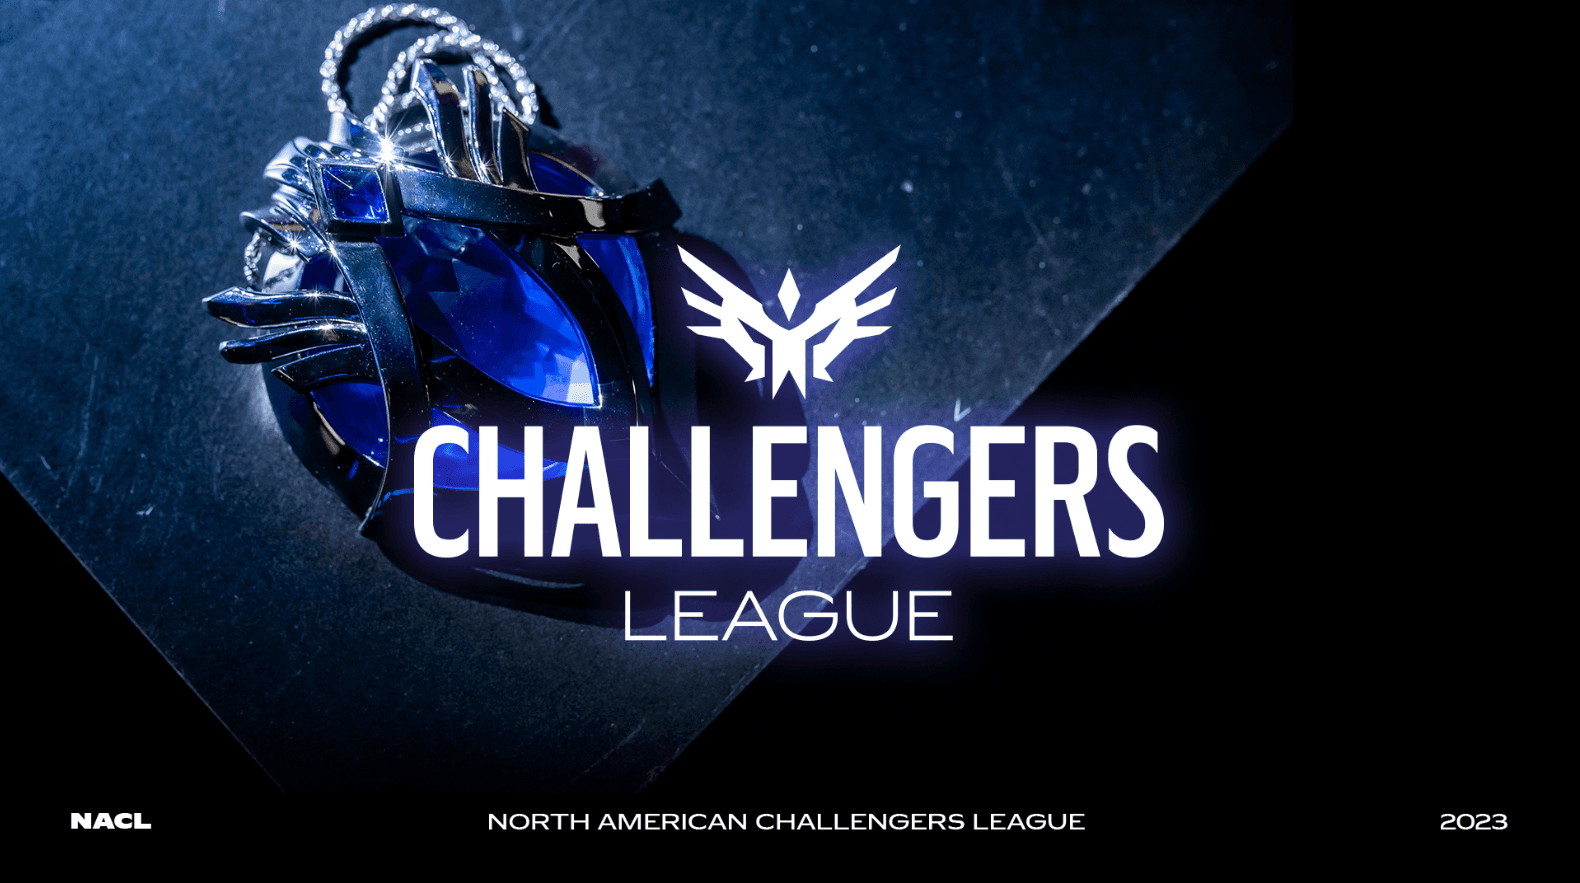 North American Challengers League